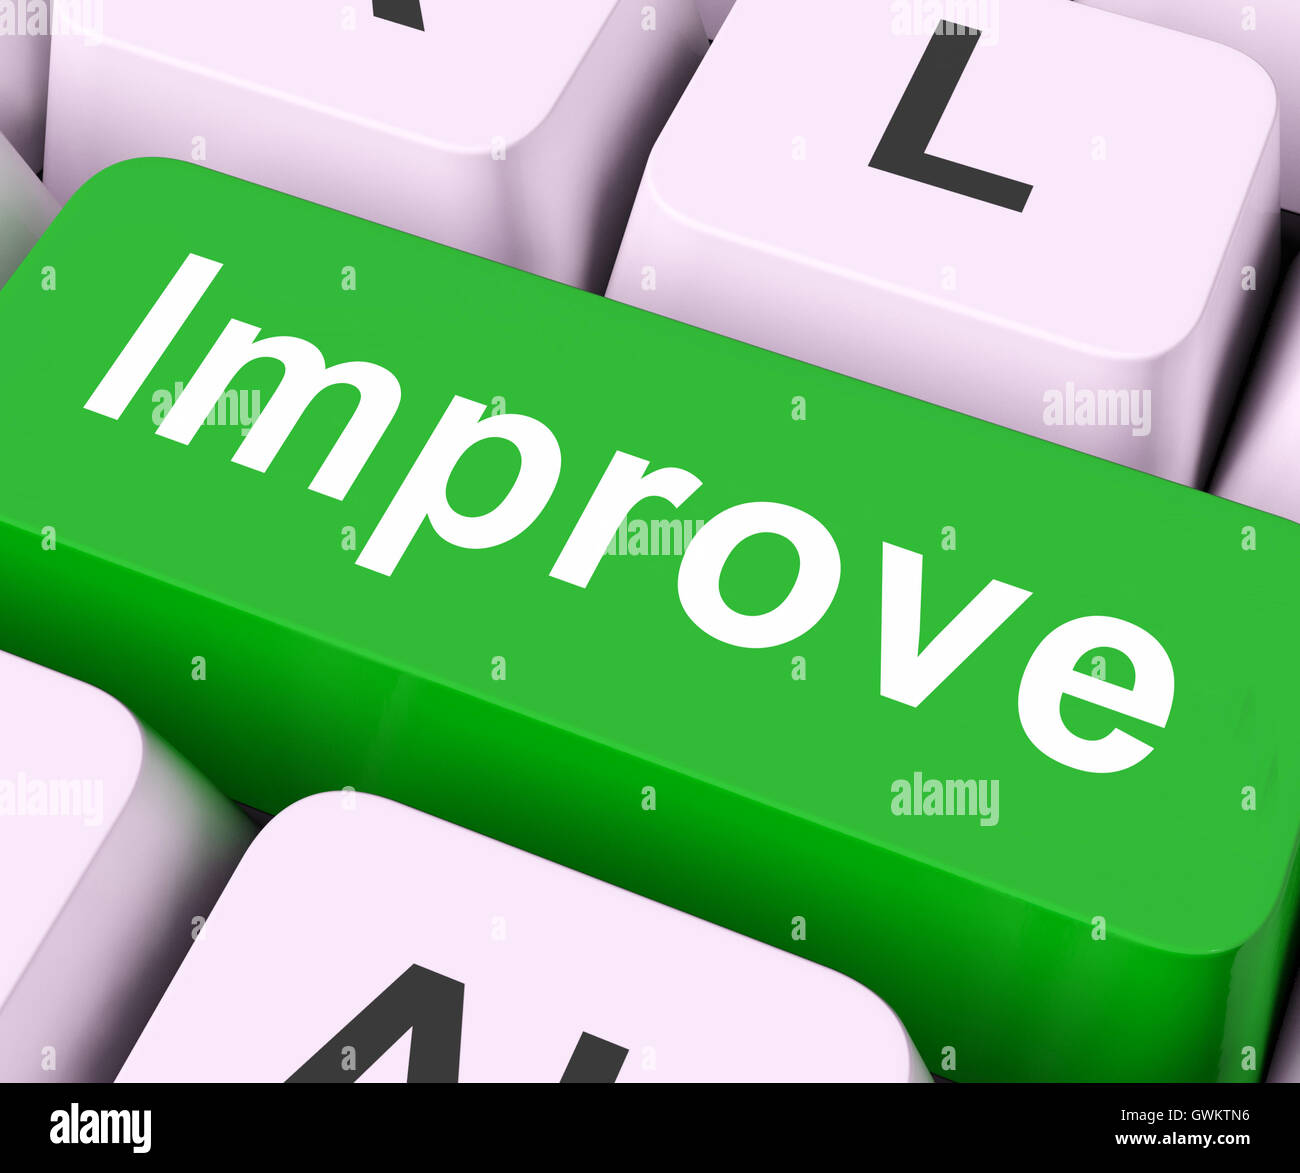 Improve Key Means Better Or Enhance Stock Photo